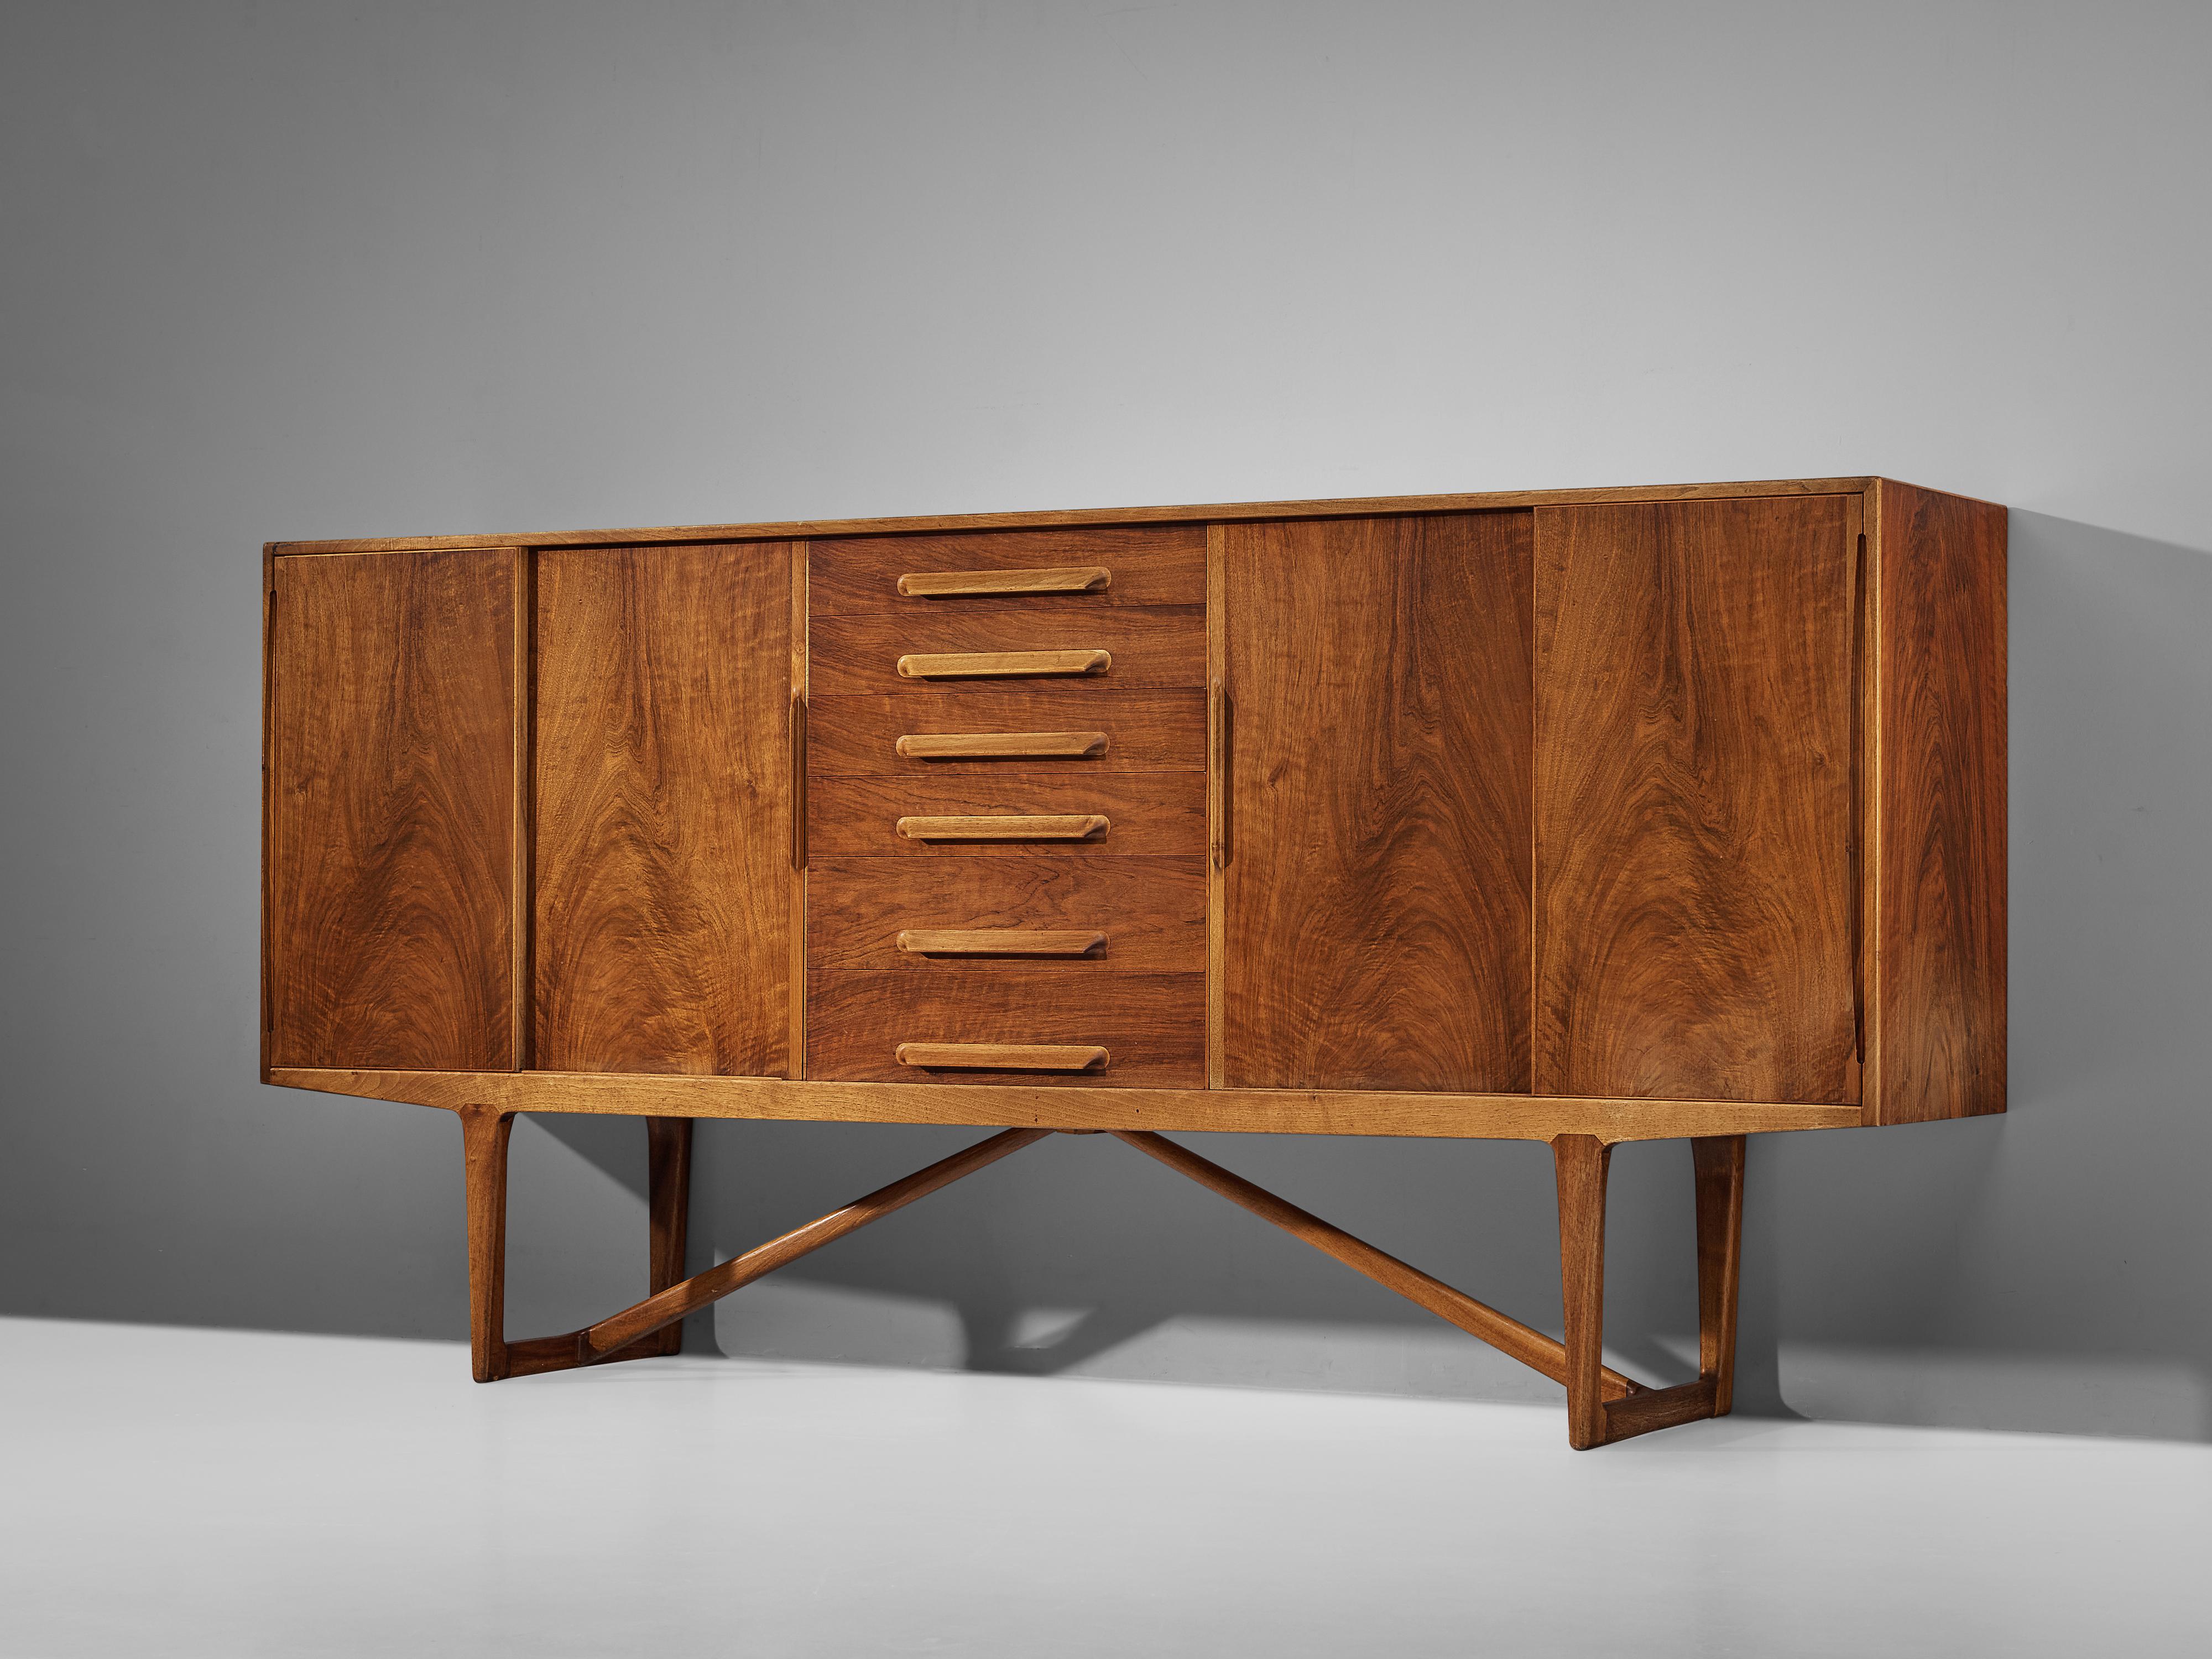 Kurt Østervig, sideboard, walnut, Denmark, 1950s

Sophisticated walnut sideboard by Kurt Østervig. The quality of this piece is reflected in the very well made seamless wooden joints and door grips, as well as the warm grain of the walnut veneer.